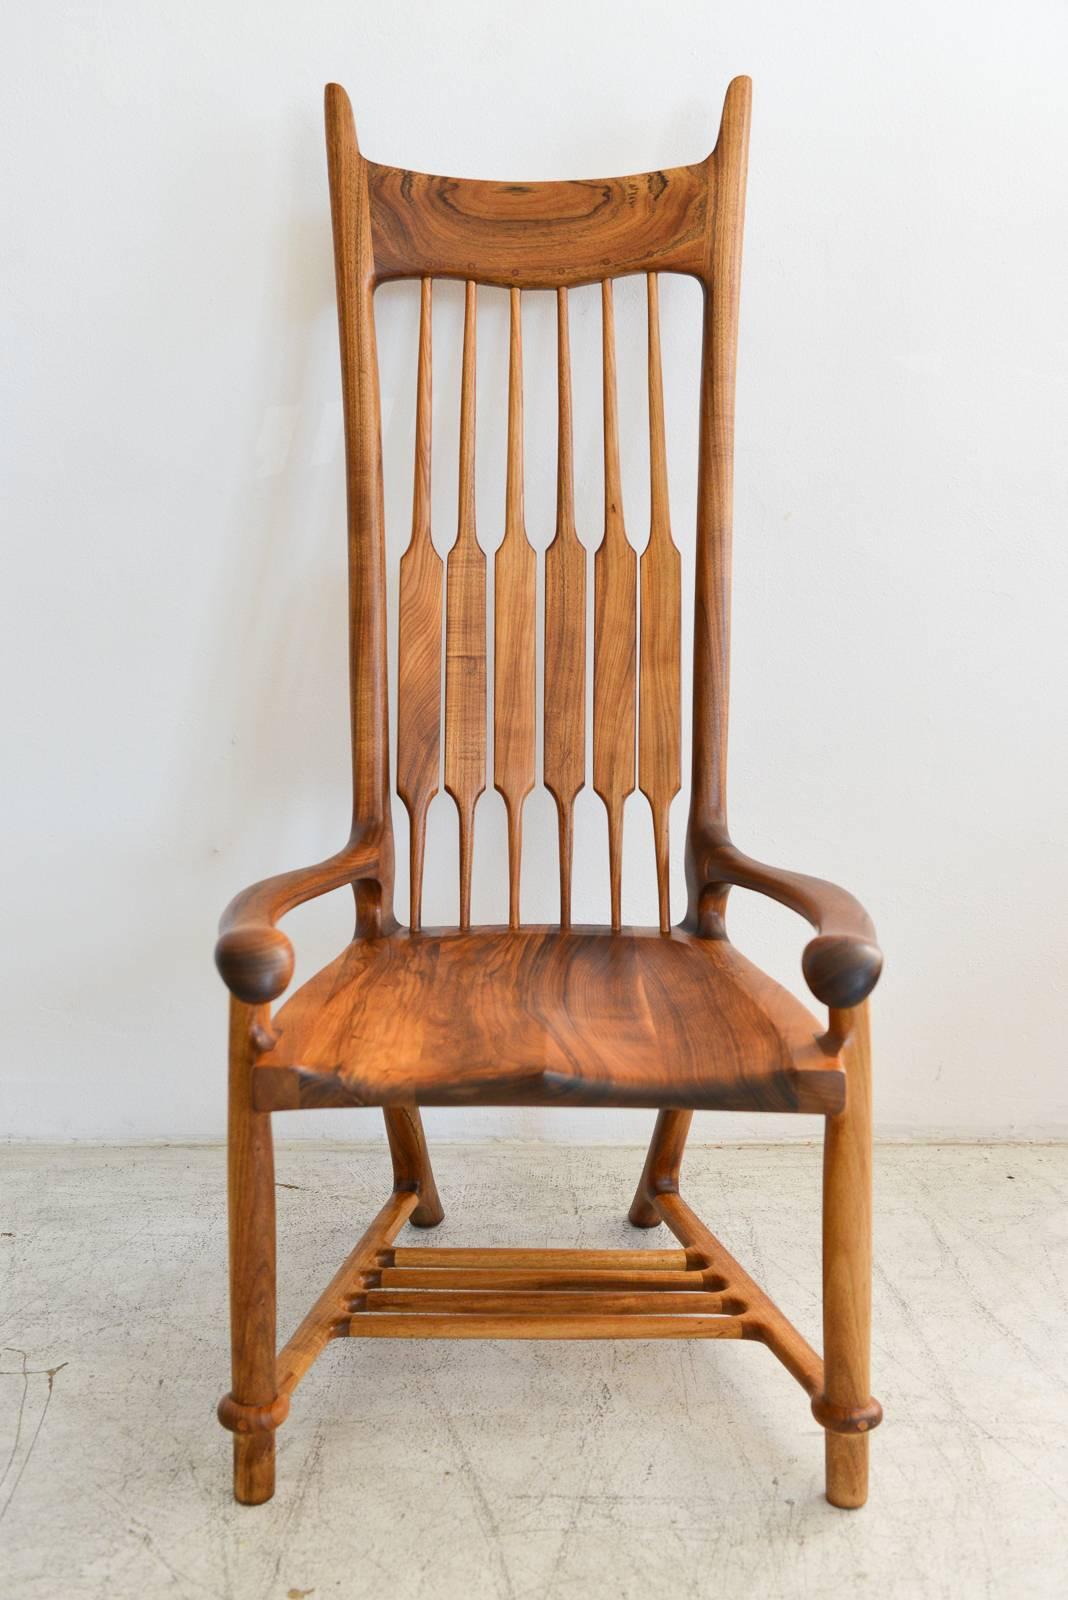 Exceptional studio craft lounge chair in rosewood by California craftsman Charles Jacobs b. 1930-d. 2007. Reminiscent of Sam Maloof's work, Mr. Jacobs was heavily influenced by his craftsmanship and design and lived in nearby Claremont,